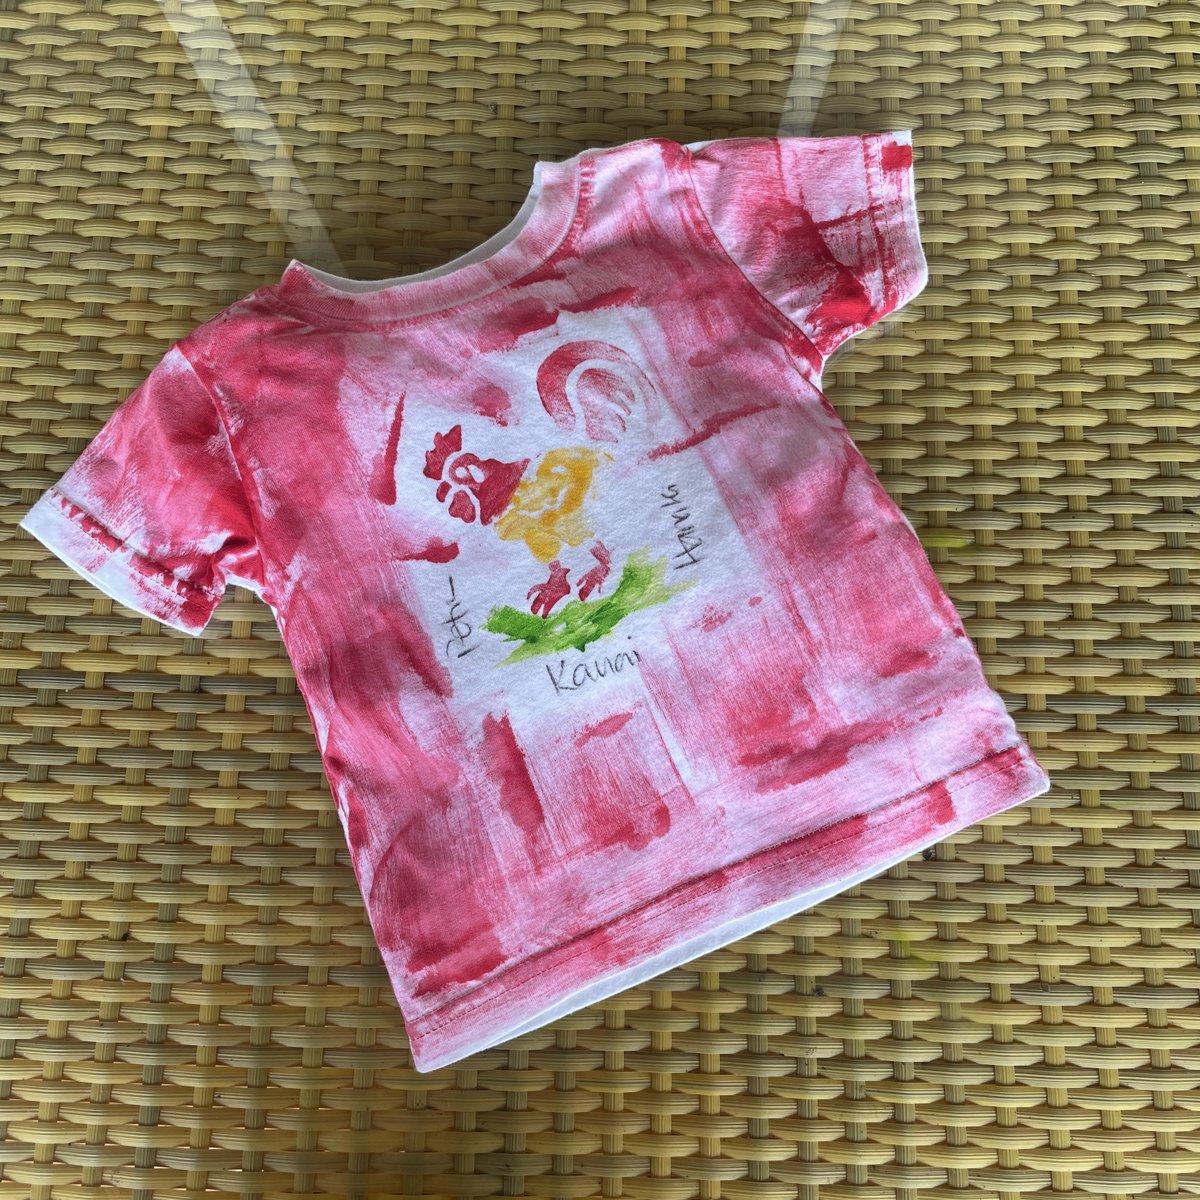 All my #kauai roosters are quiet! Perfect for #Easter2023 #eastergift #FreeShipping #tshirts #handpainted #Hawaii #Hawaiian #fashion #kidsgifts #etsyshop @EtsyRT @HyperRTs @SympathyRTs etsy.com/listing/974038…